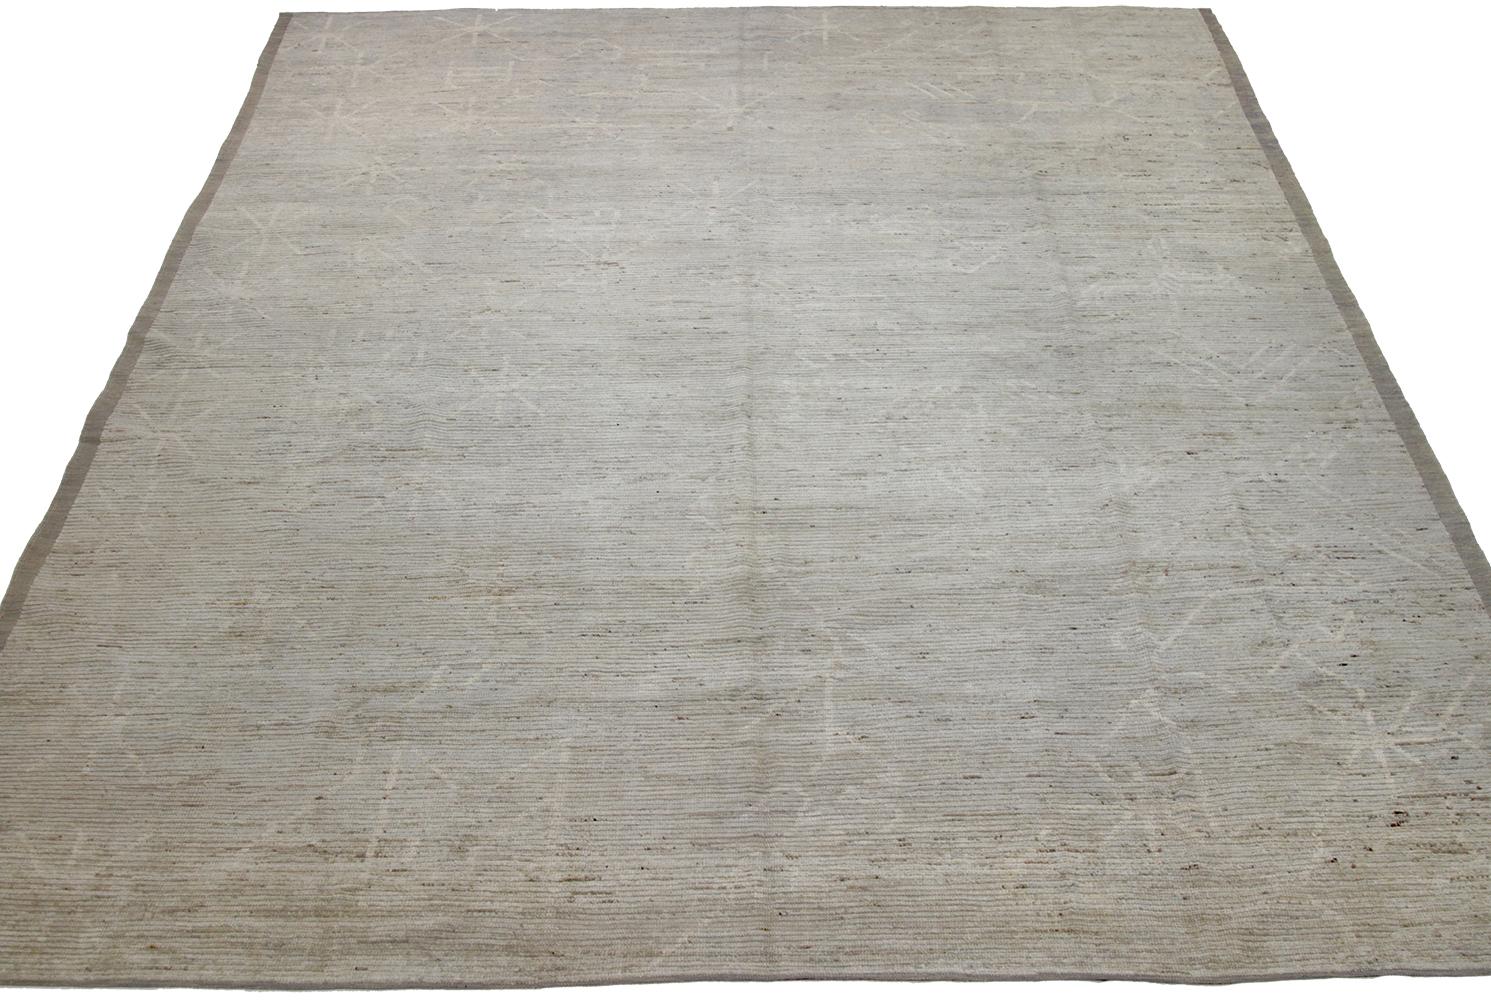 Afghan Nazmiyal Collection Soft Grey Modern Moroccan Style Rug 10 ft 2 in x 13 ft 6 in